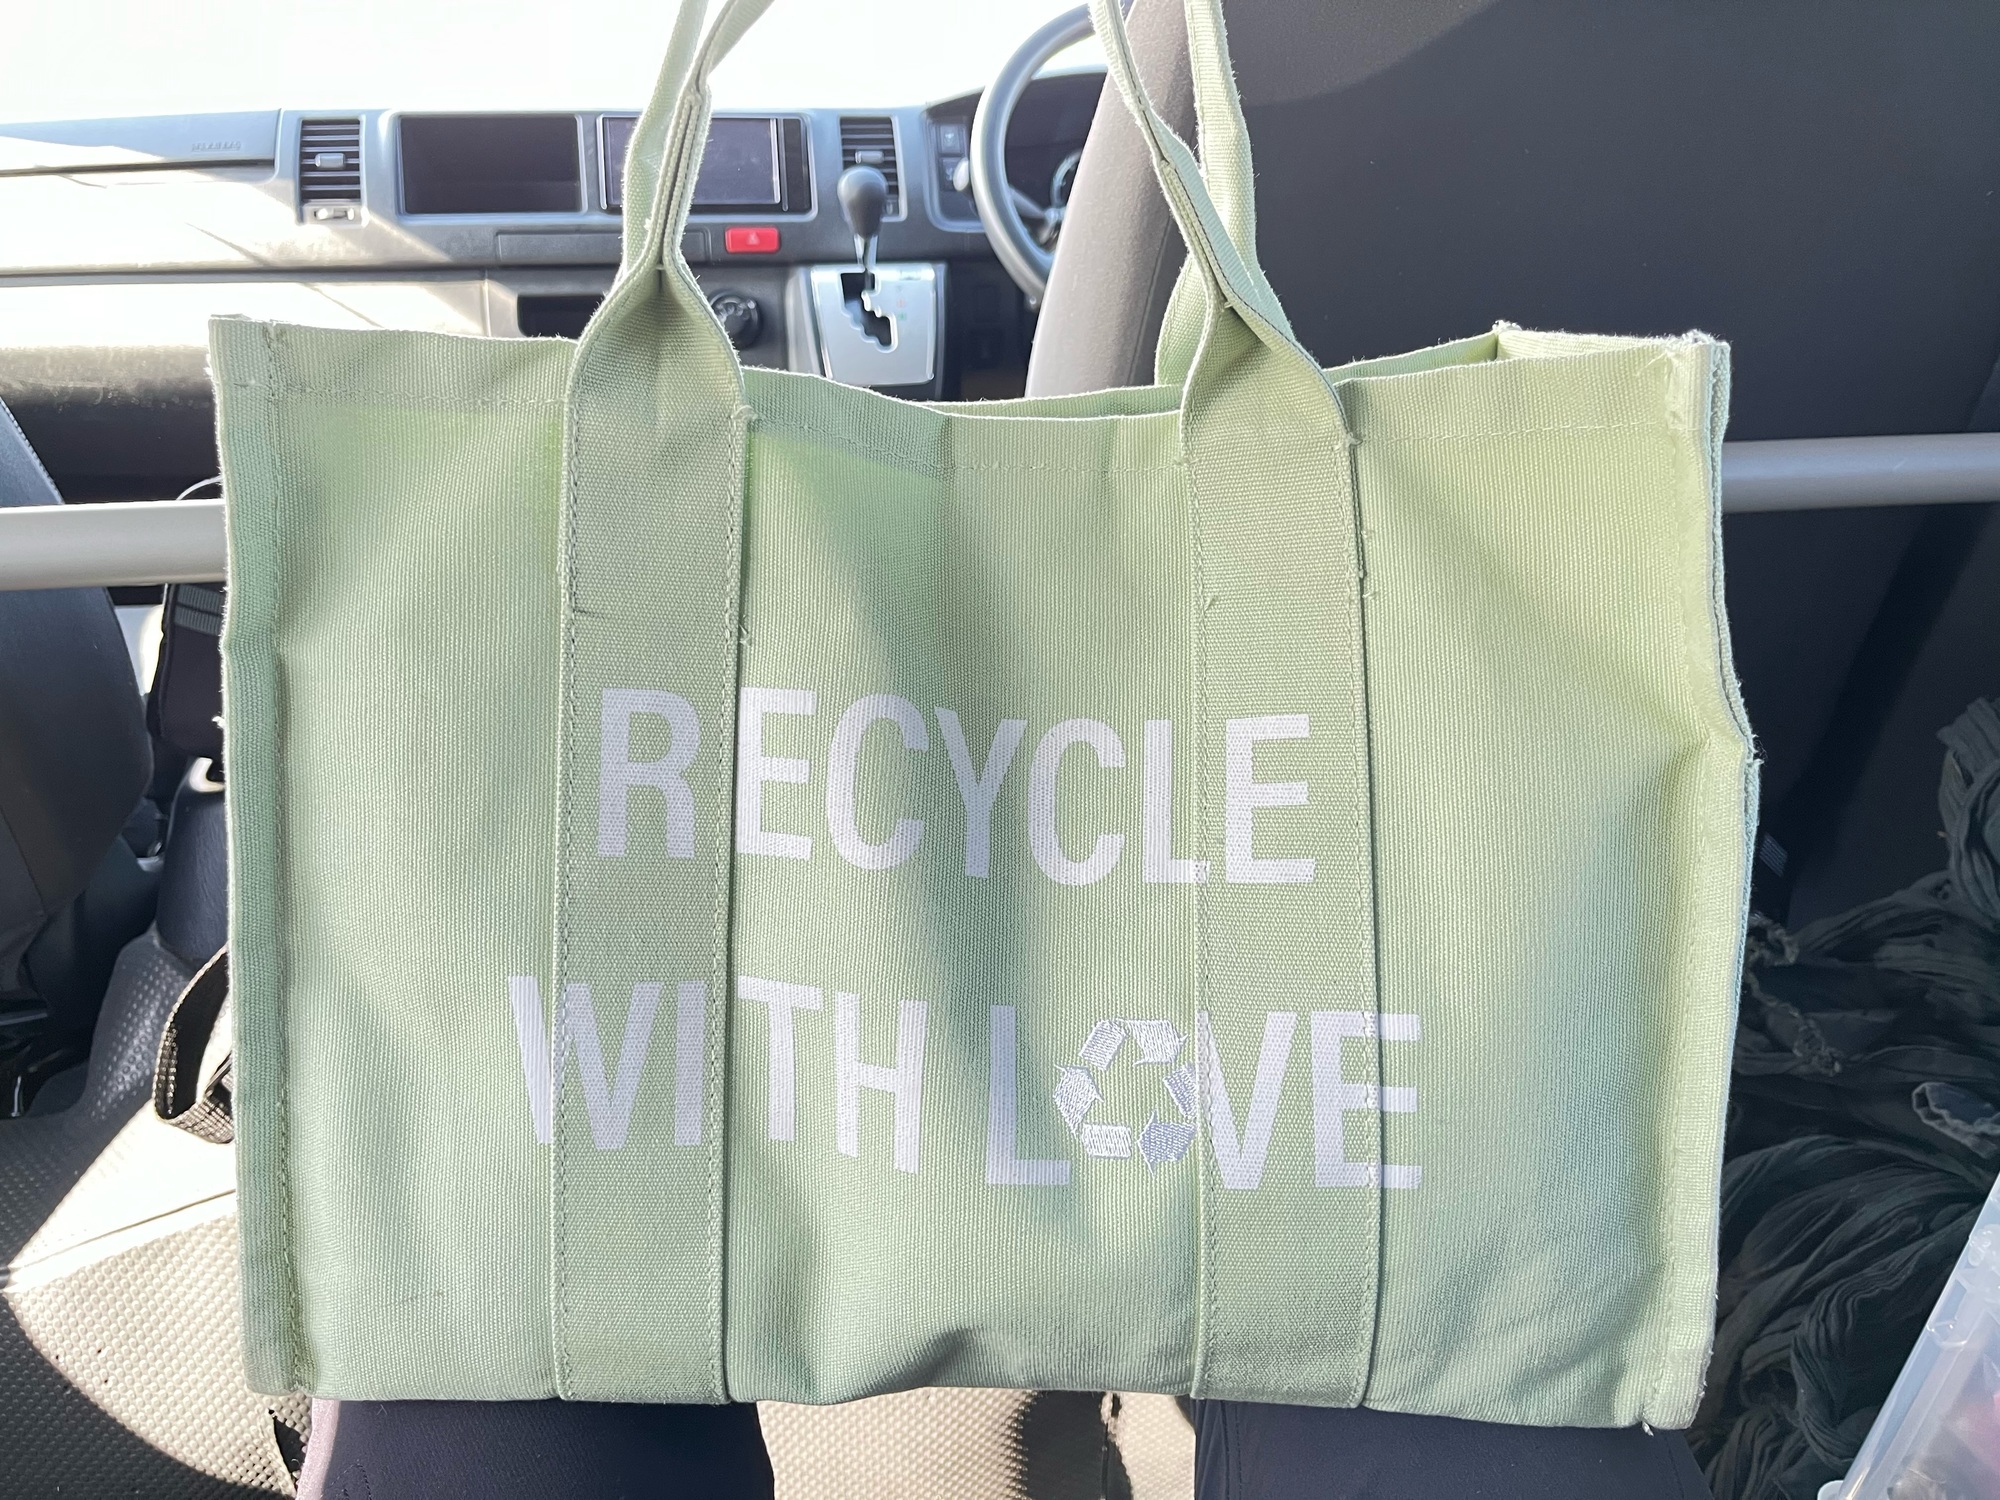 Recycle with love